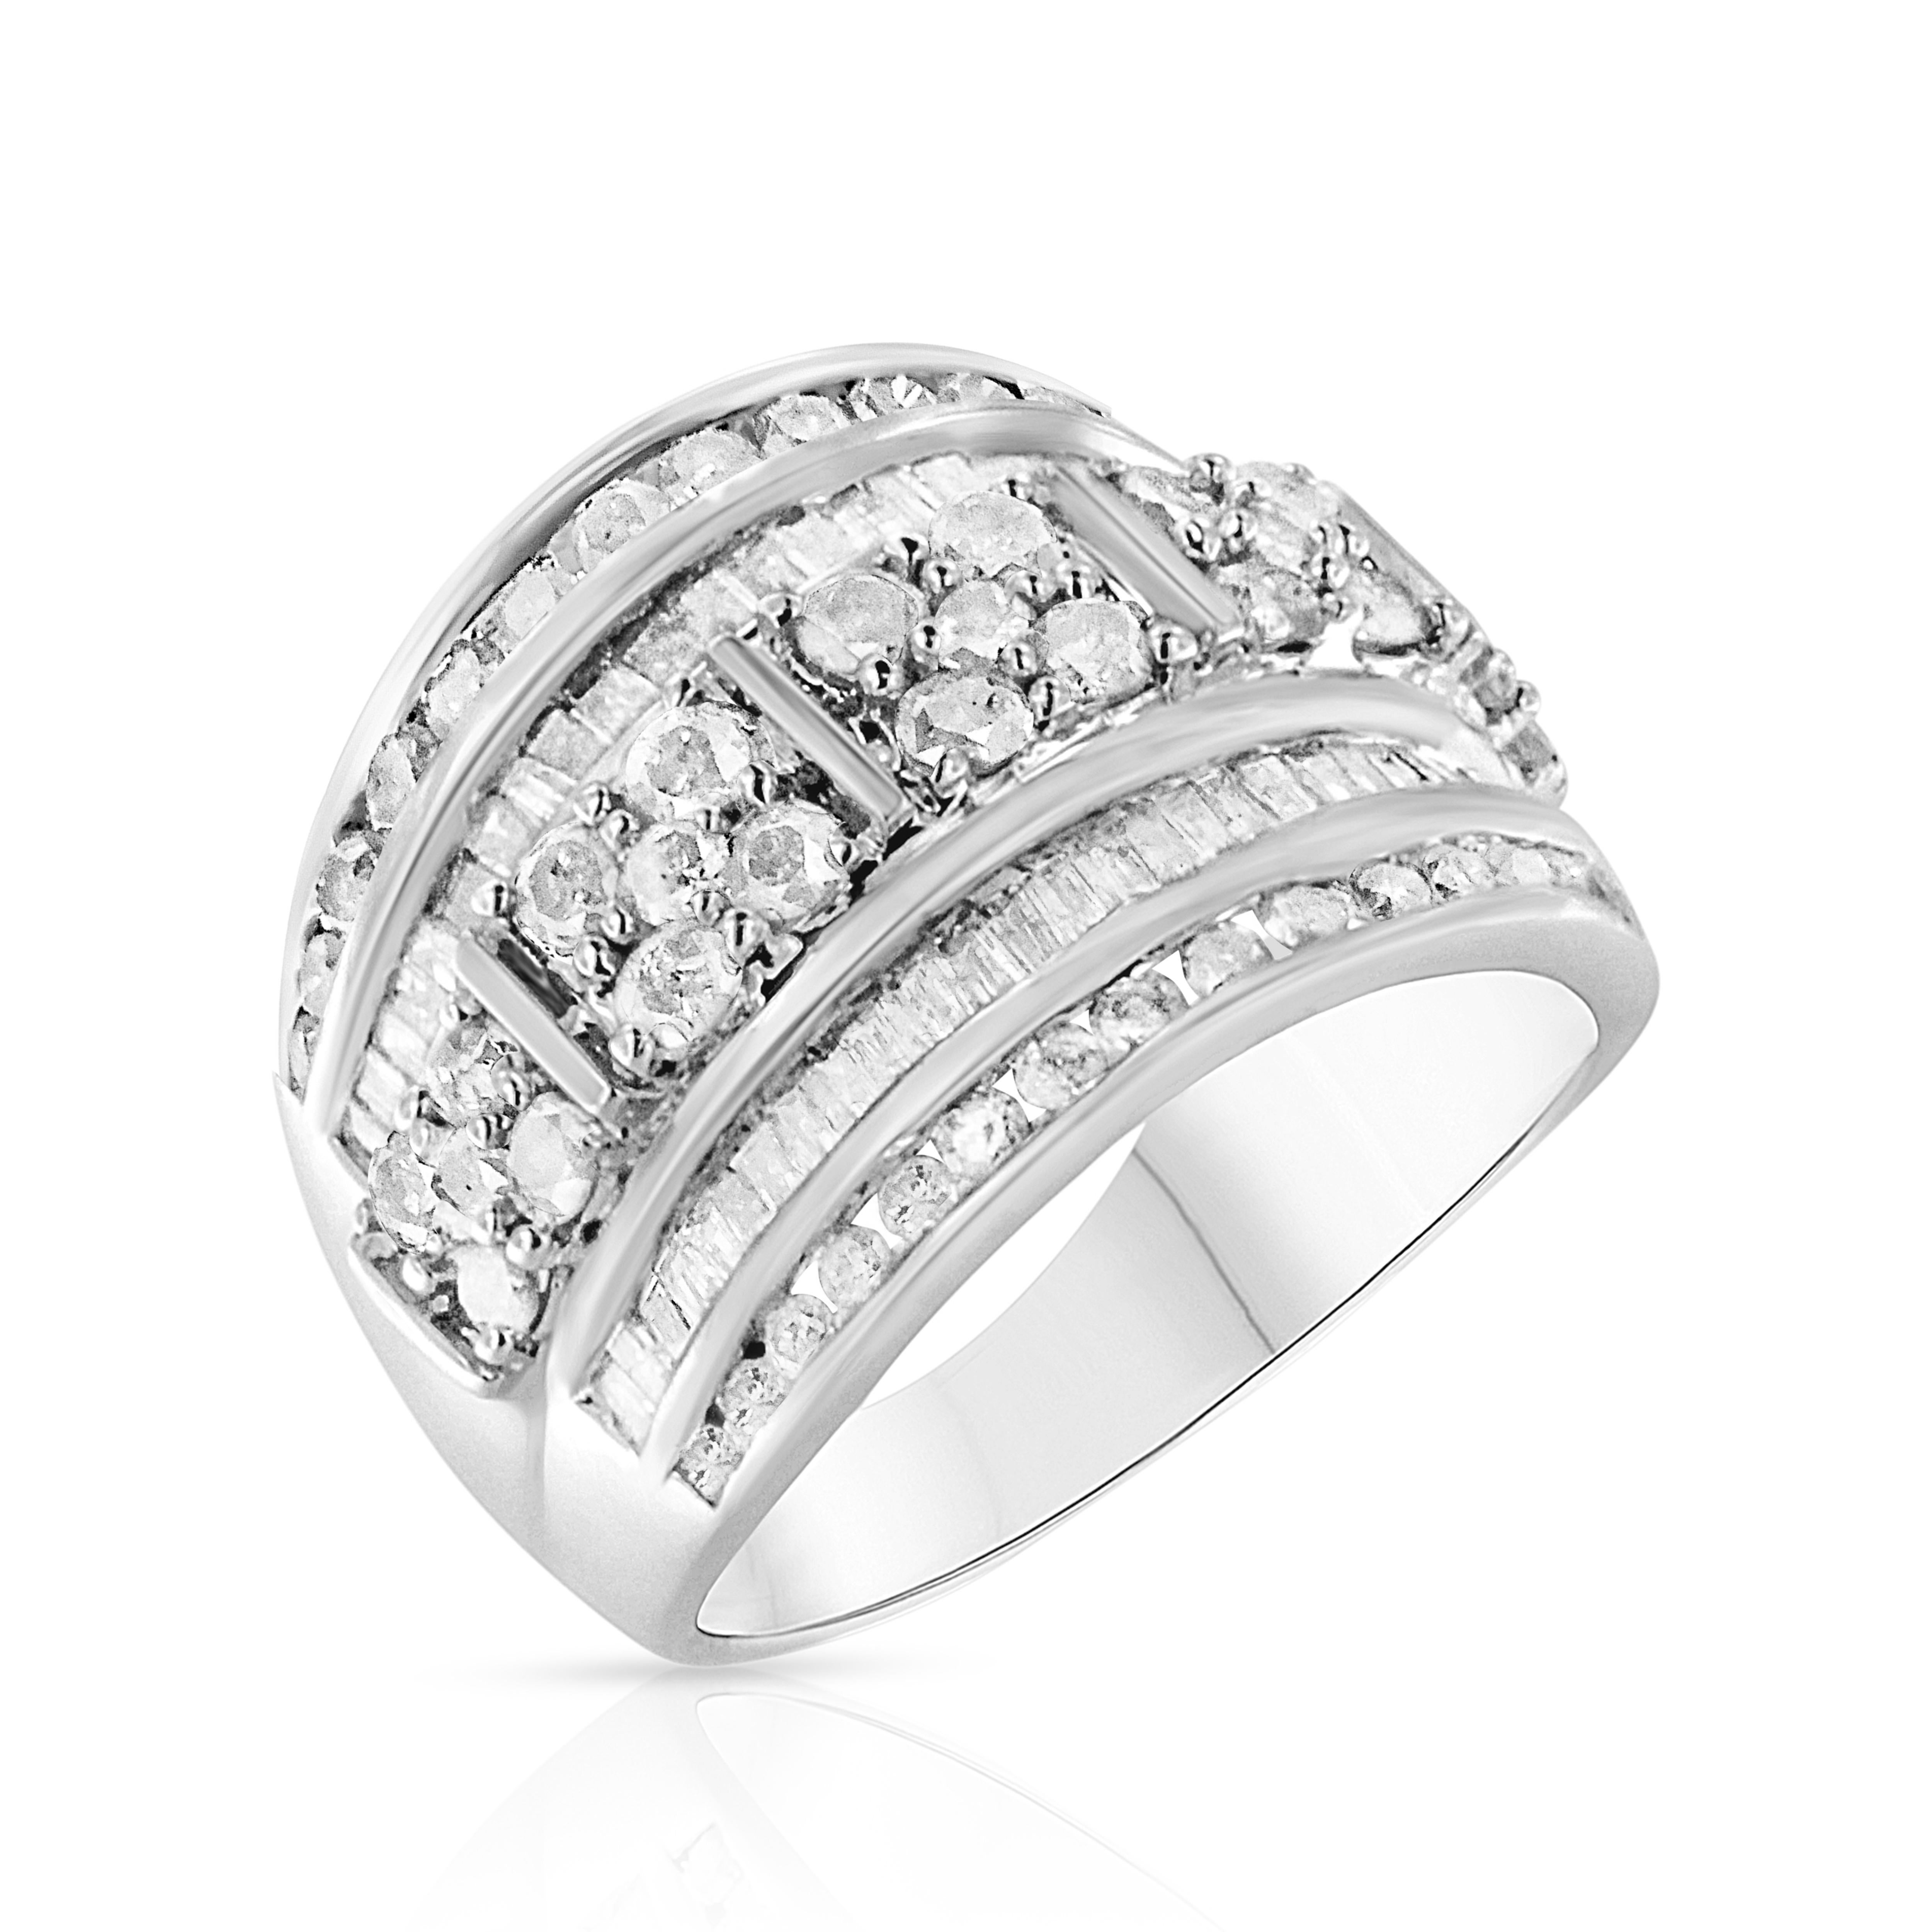 Elegant and timeless, this .925 sterling silver and diamond cocktail ring features 2.0 carat total weight of round and baguette cut promo quality diamonds, which are milky and cloudy in nature. The center row of this multi-row ring features repeated